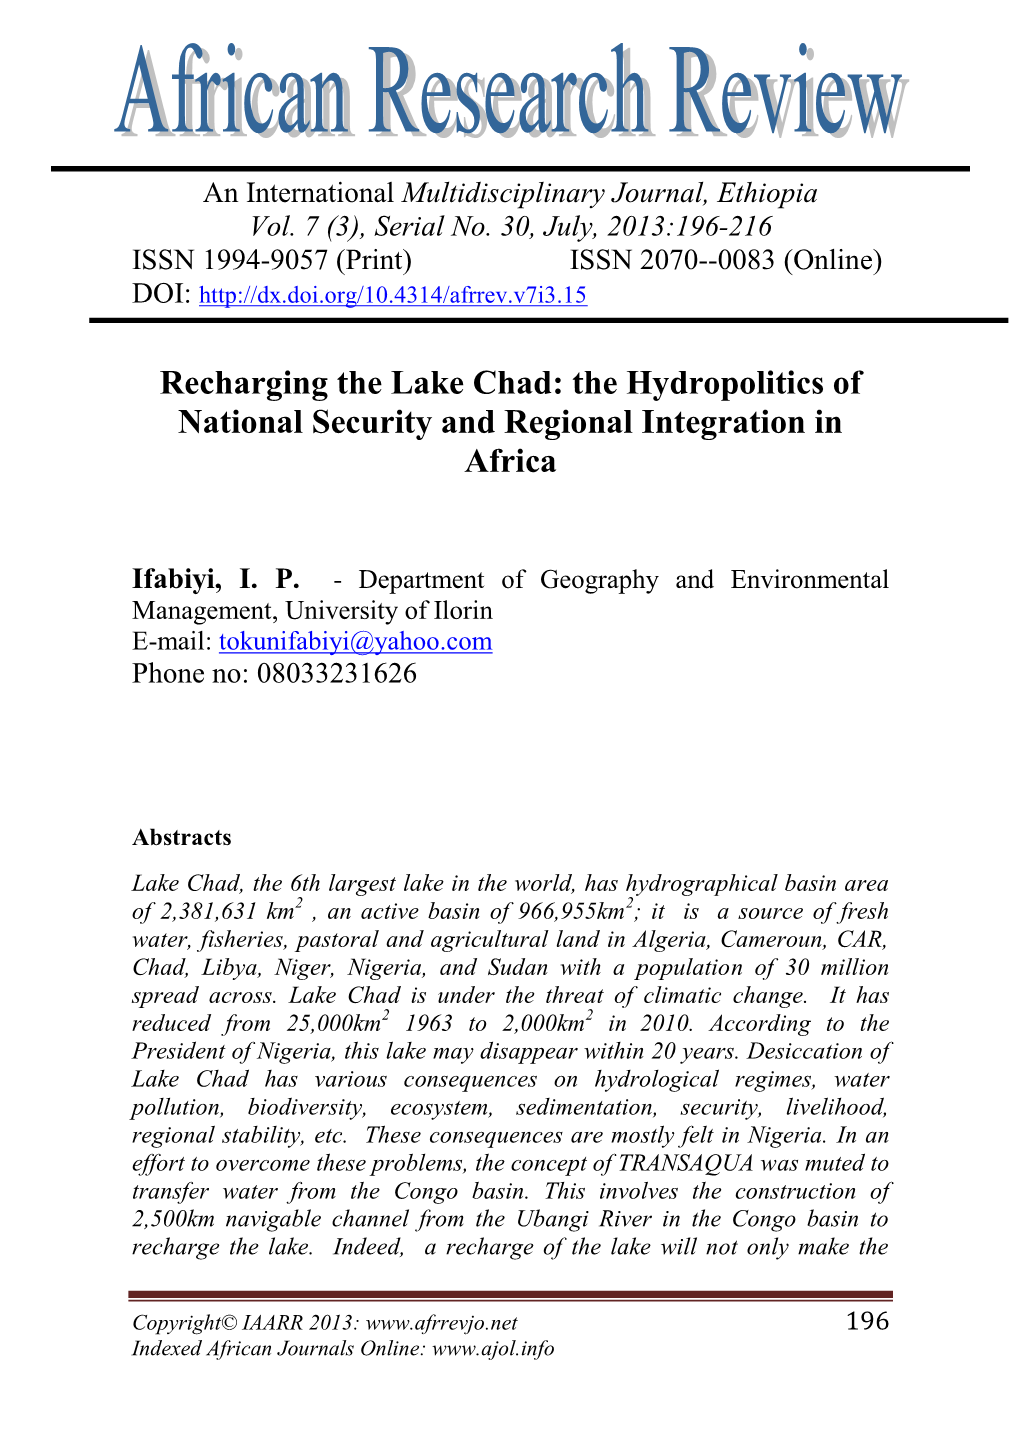 Recharging the Lake Chad: the Hydropolitics of National Security and Regional Integration in Africa